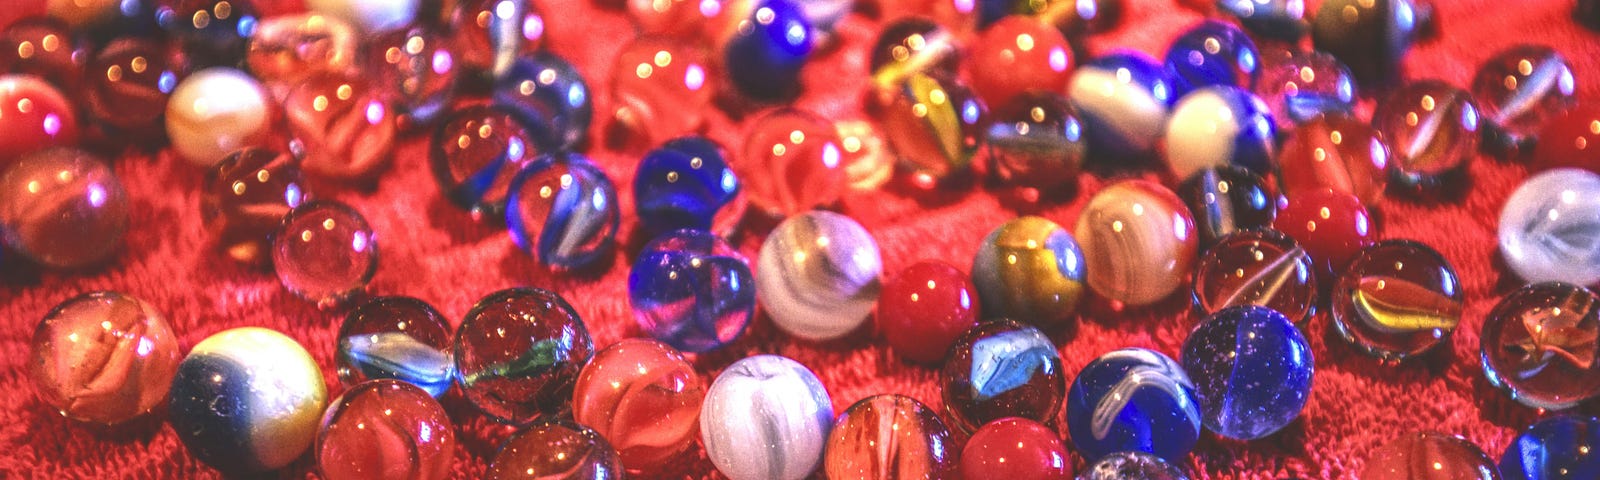 colored marbles on a red surface